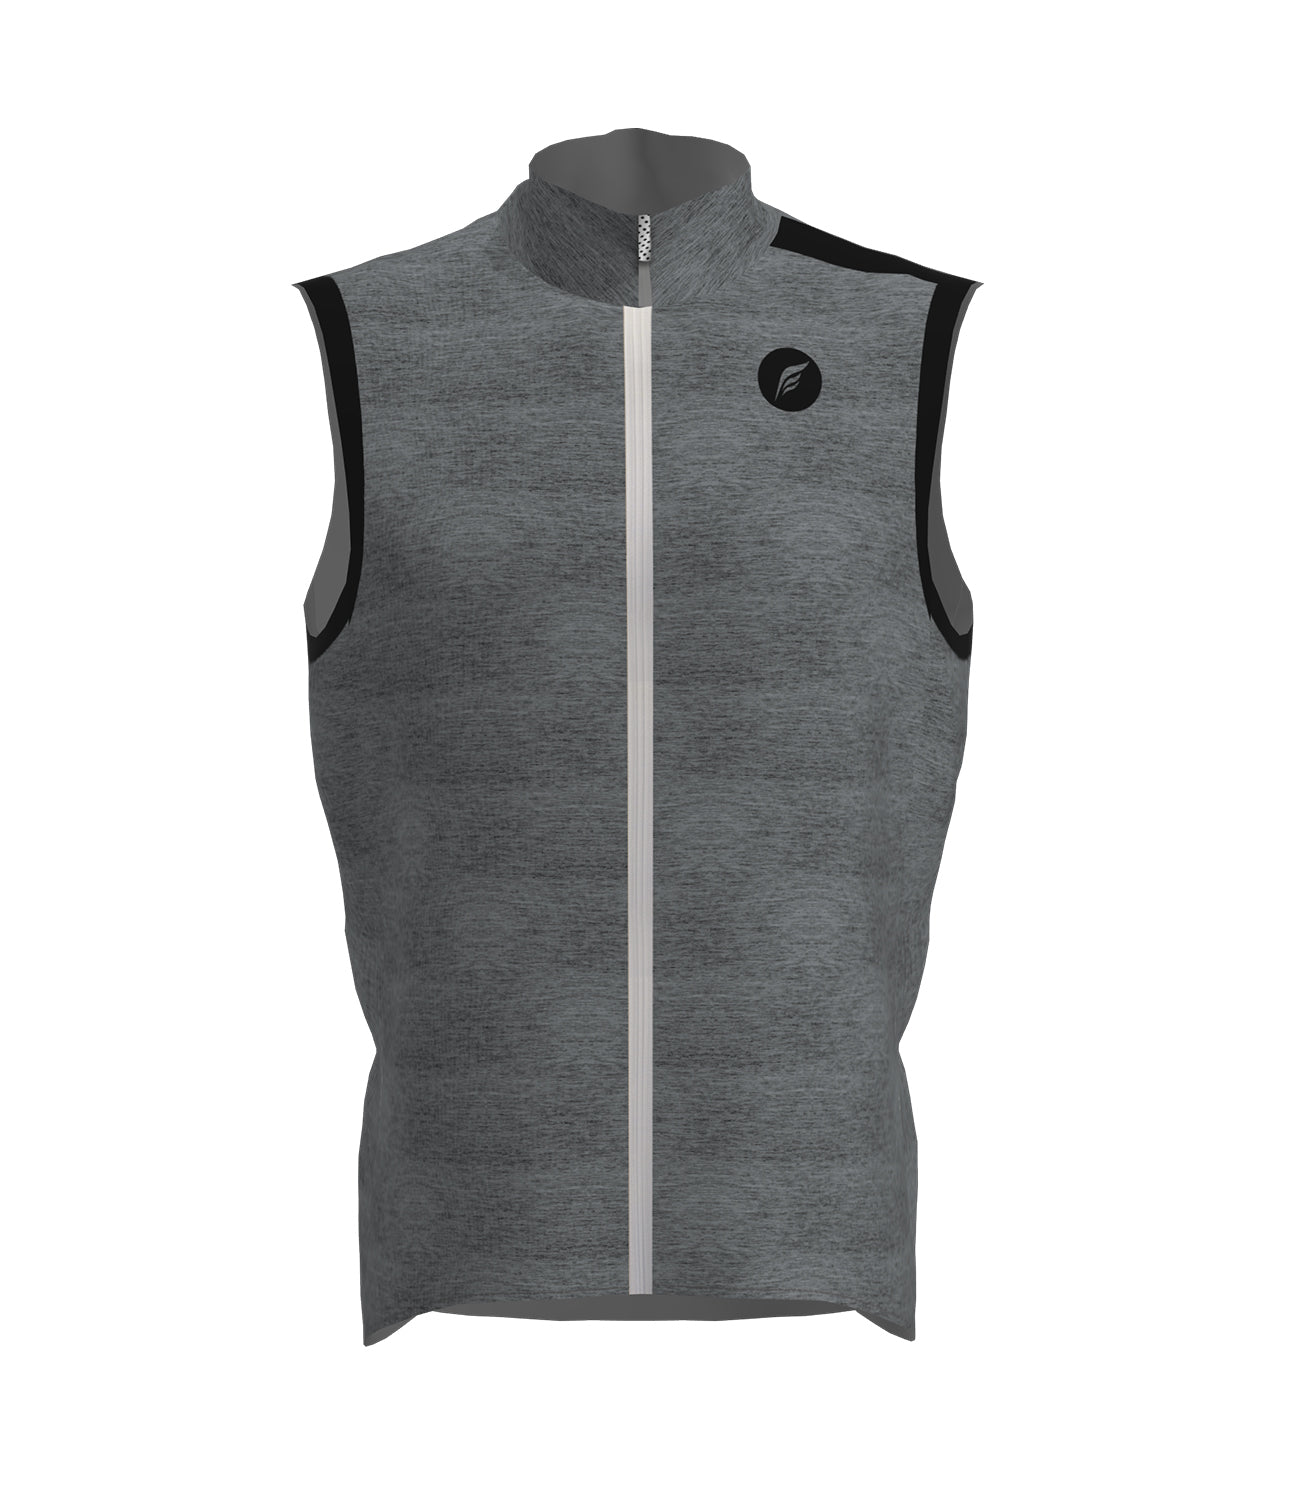 Chaleco Ciclismo Tricapa TRex WTS Gris – ufwapparel